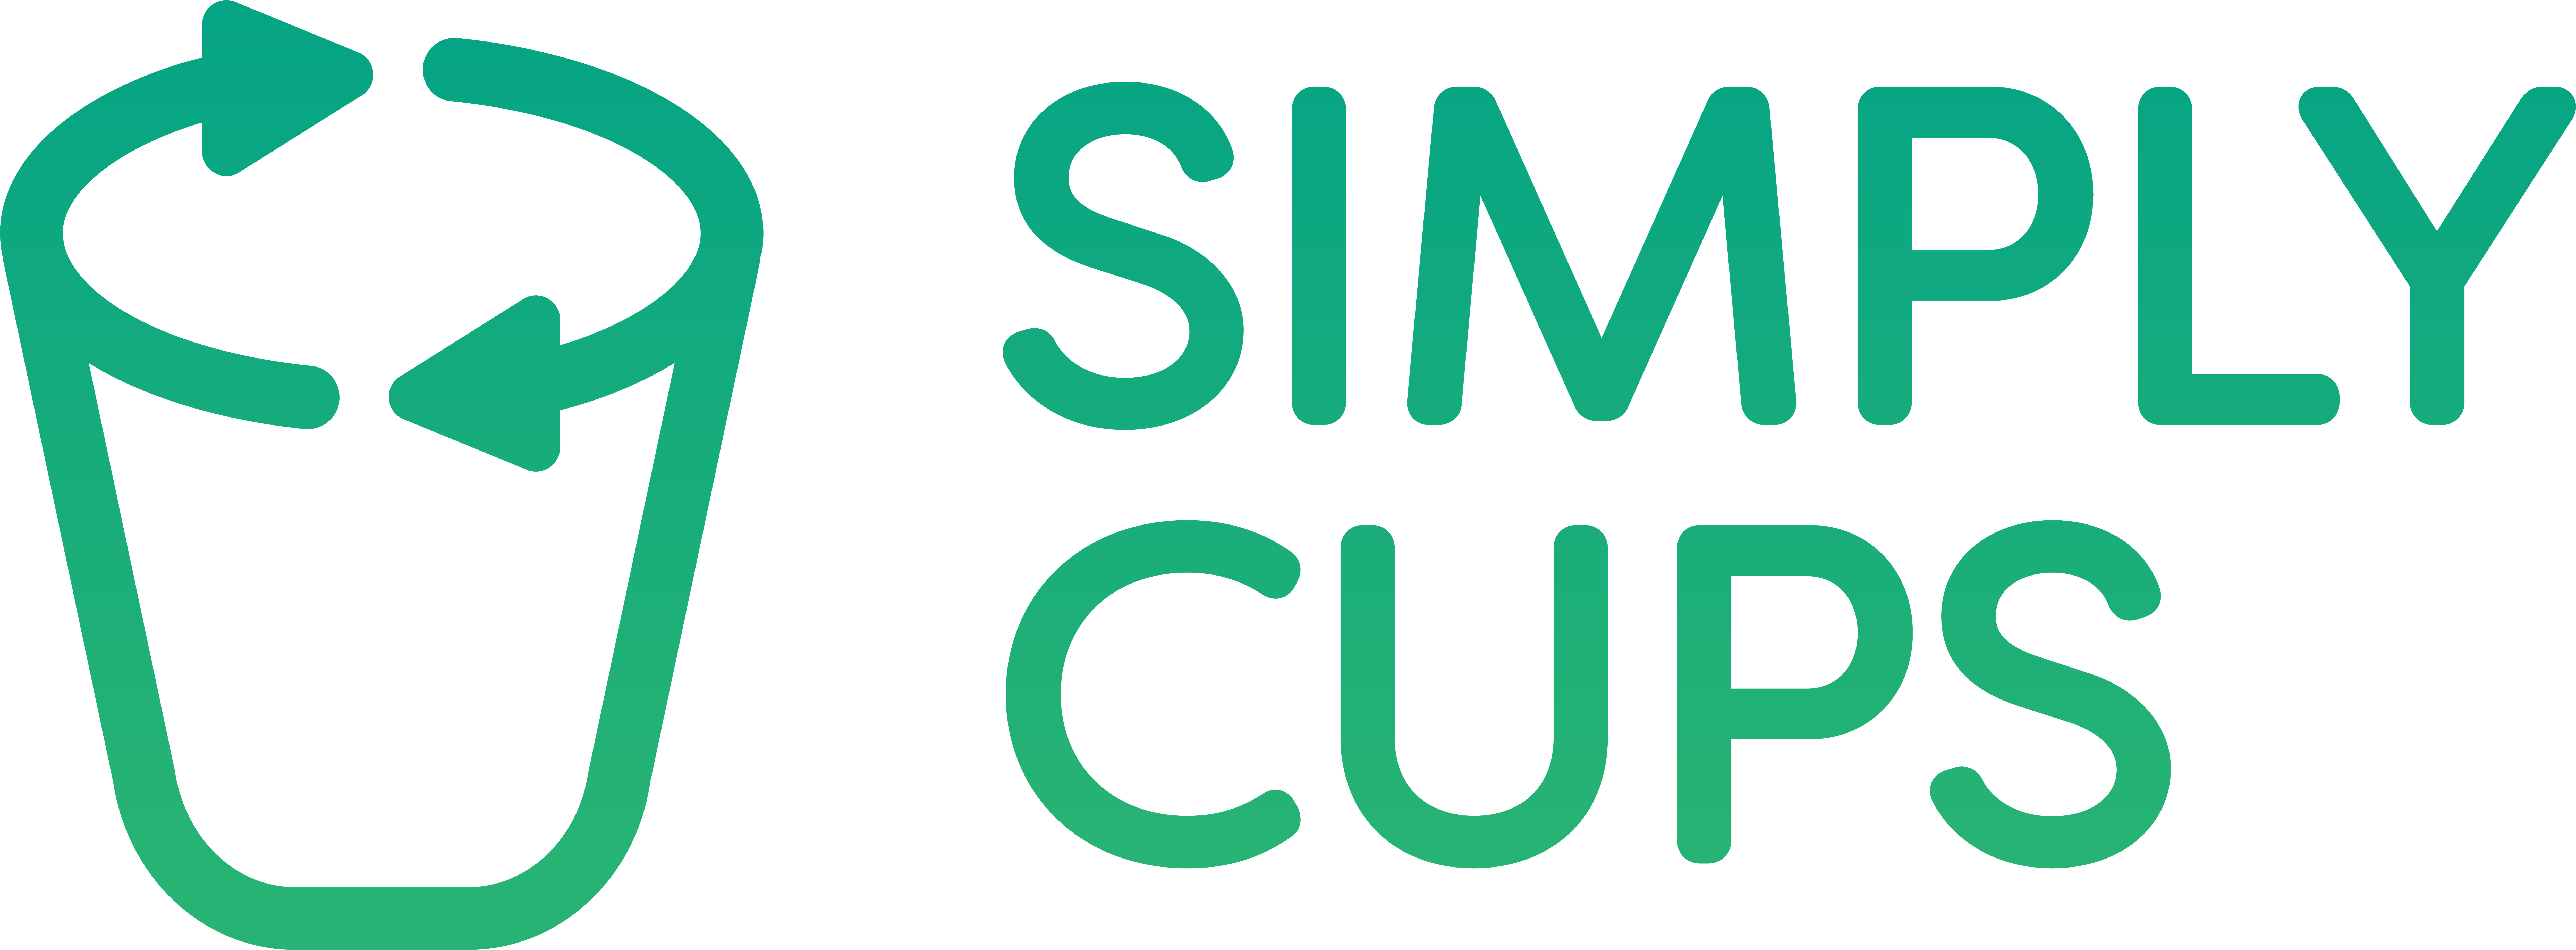 Simply Cups logo